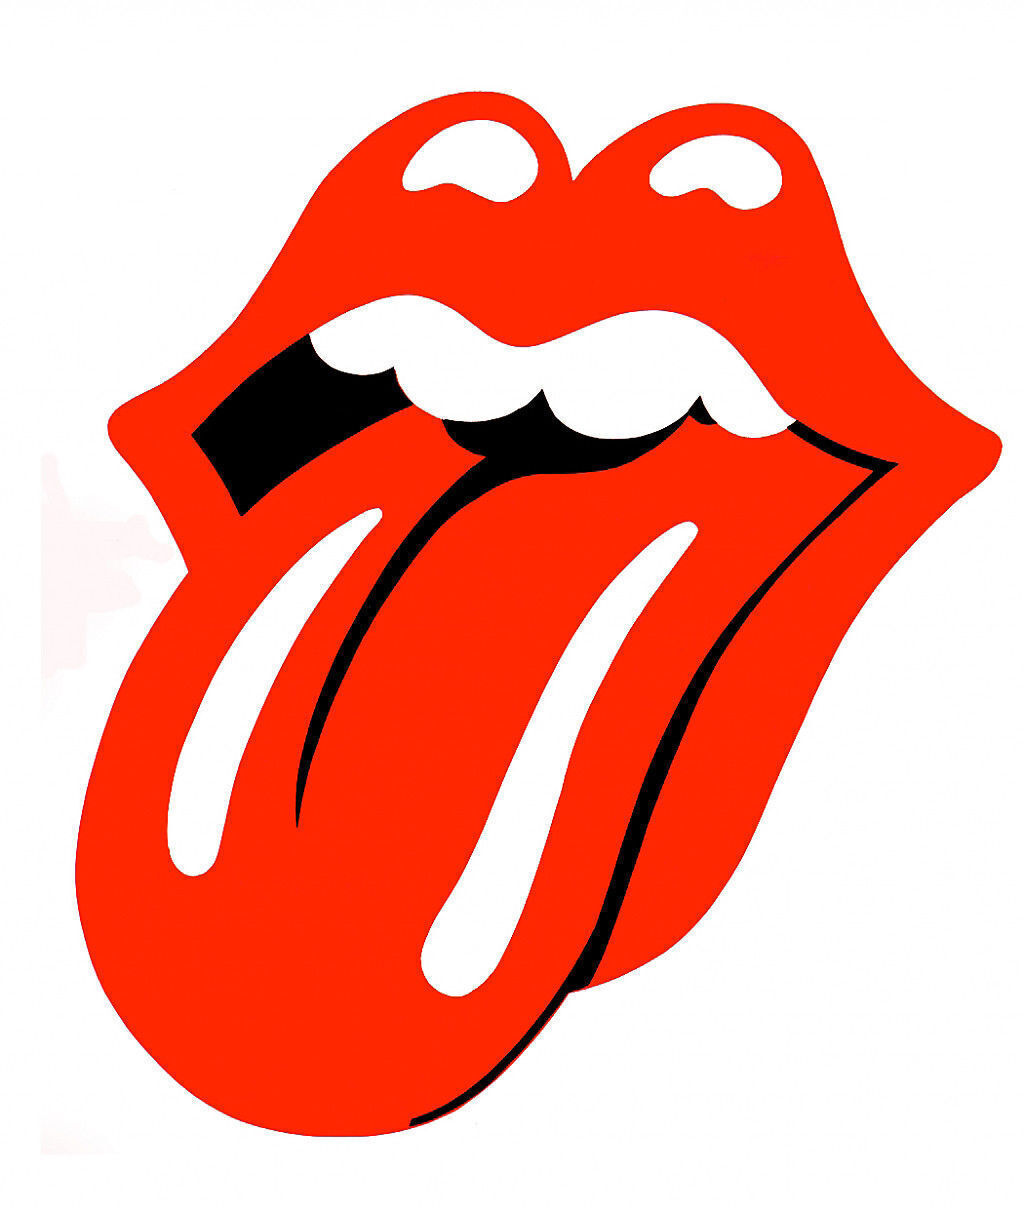 ROLLING STONES TONGUE DECAL STICKER USA LAPTOP VEHICLE CAR TRUCK WINDOW WALL